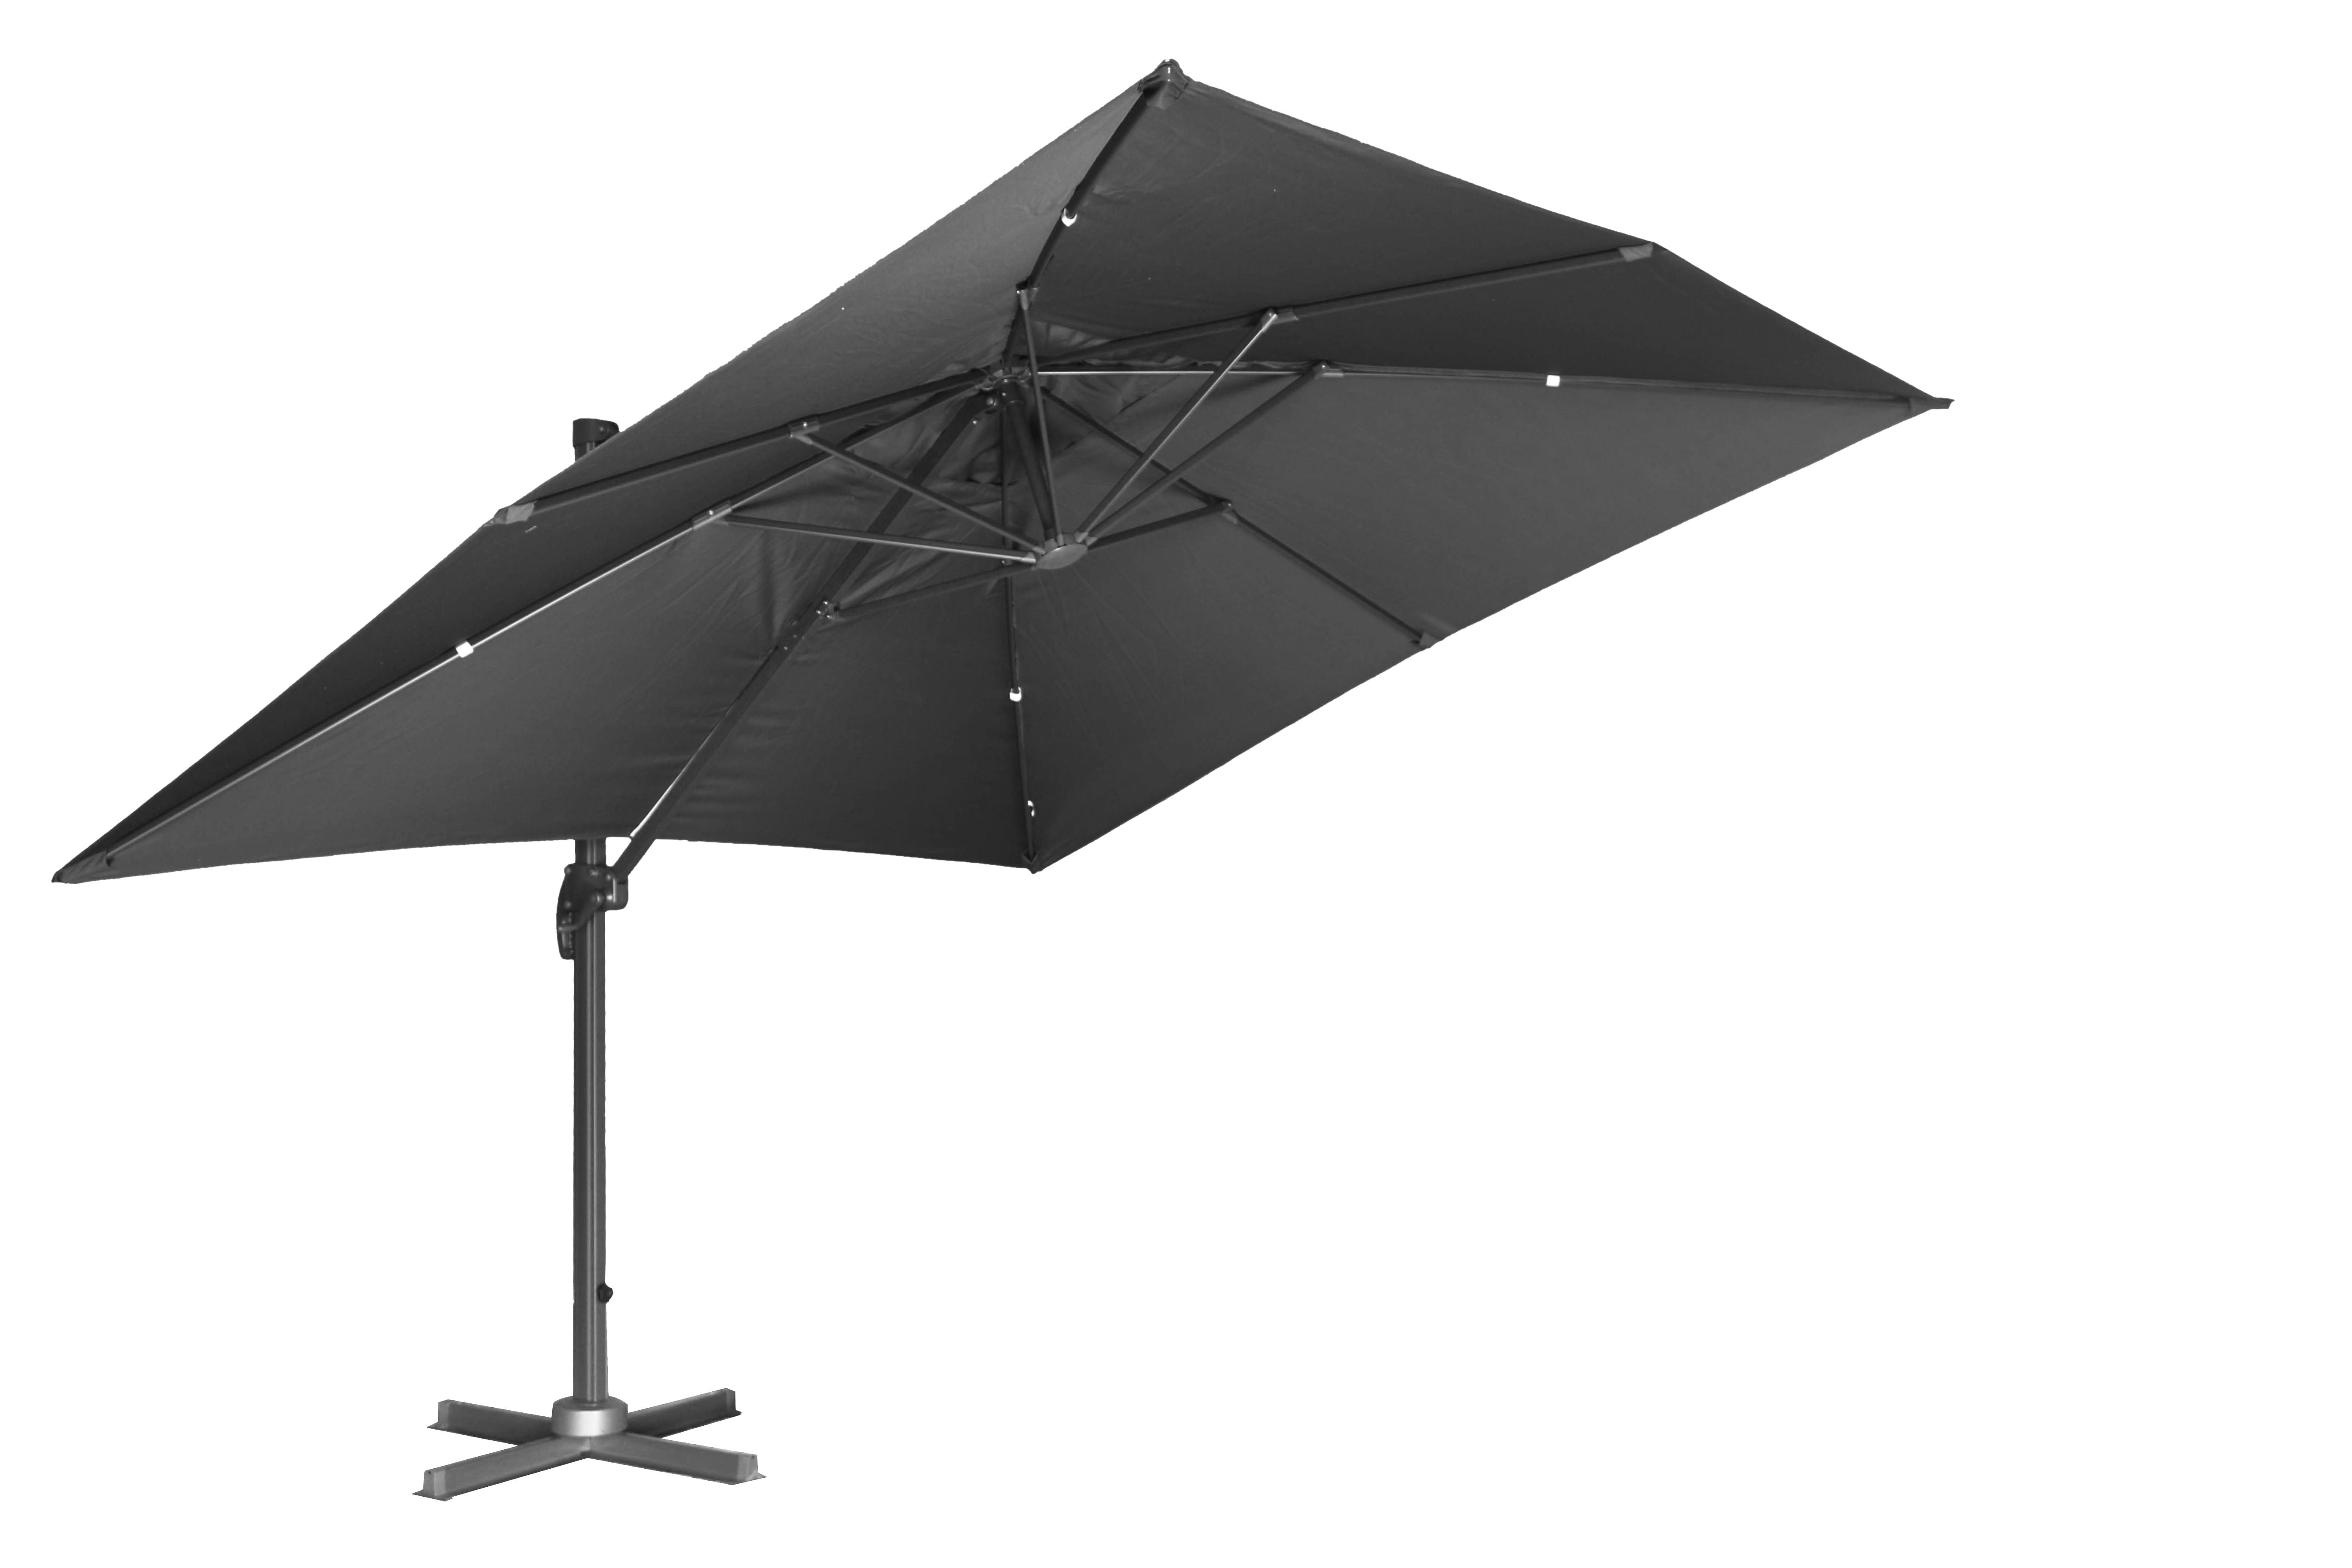 PatioZone 11' Tilting Rotating Luxury Offset Umbrella (Cover Incl.) in UV-Protected Polyester (MOSS-T1203C) - Charcoal